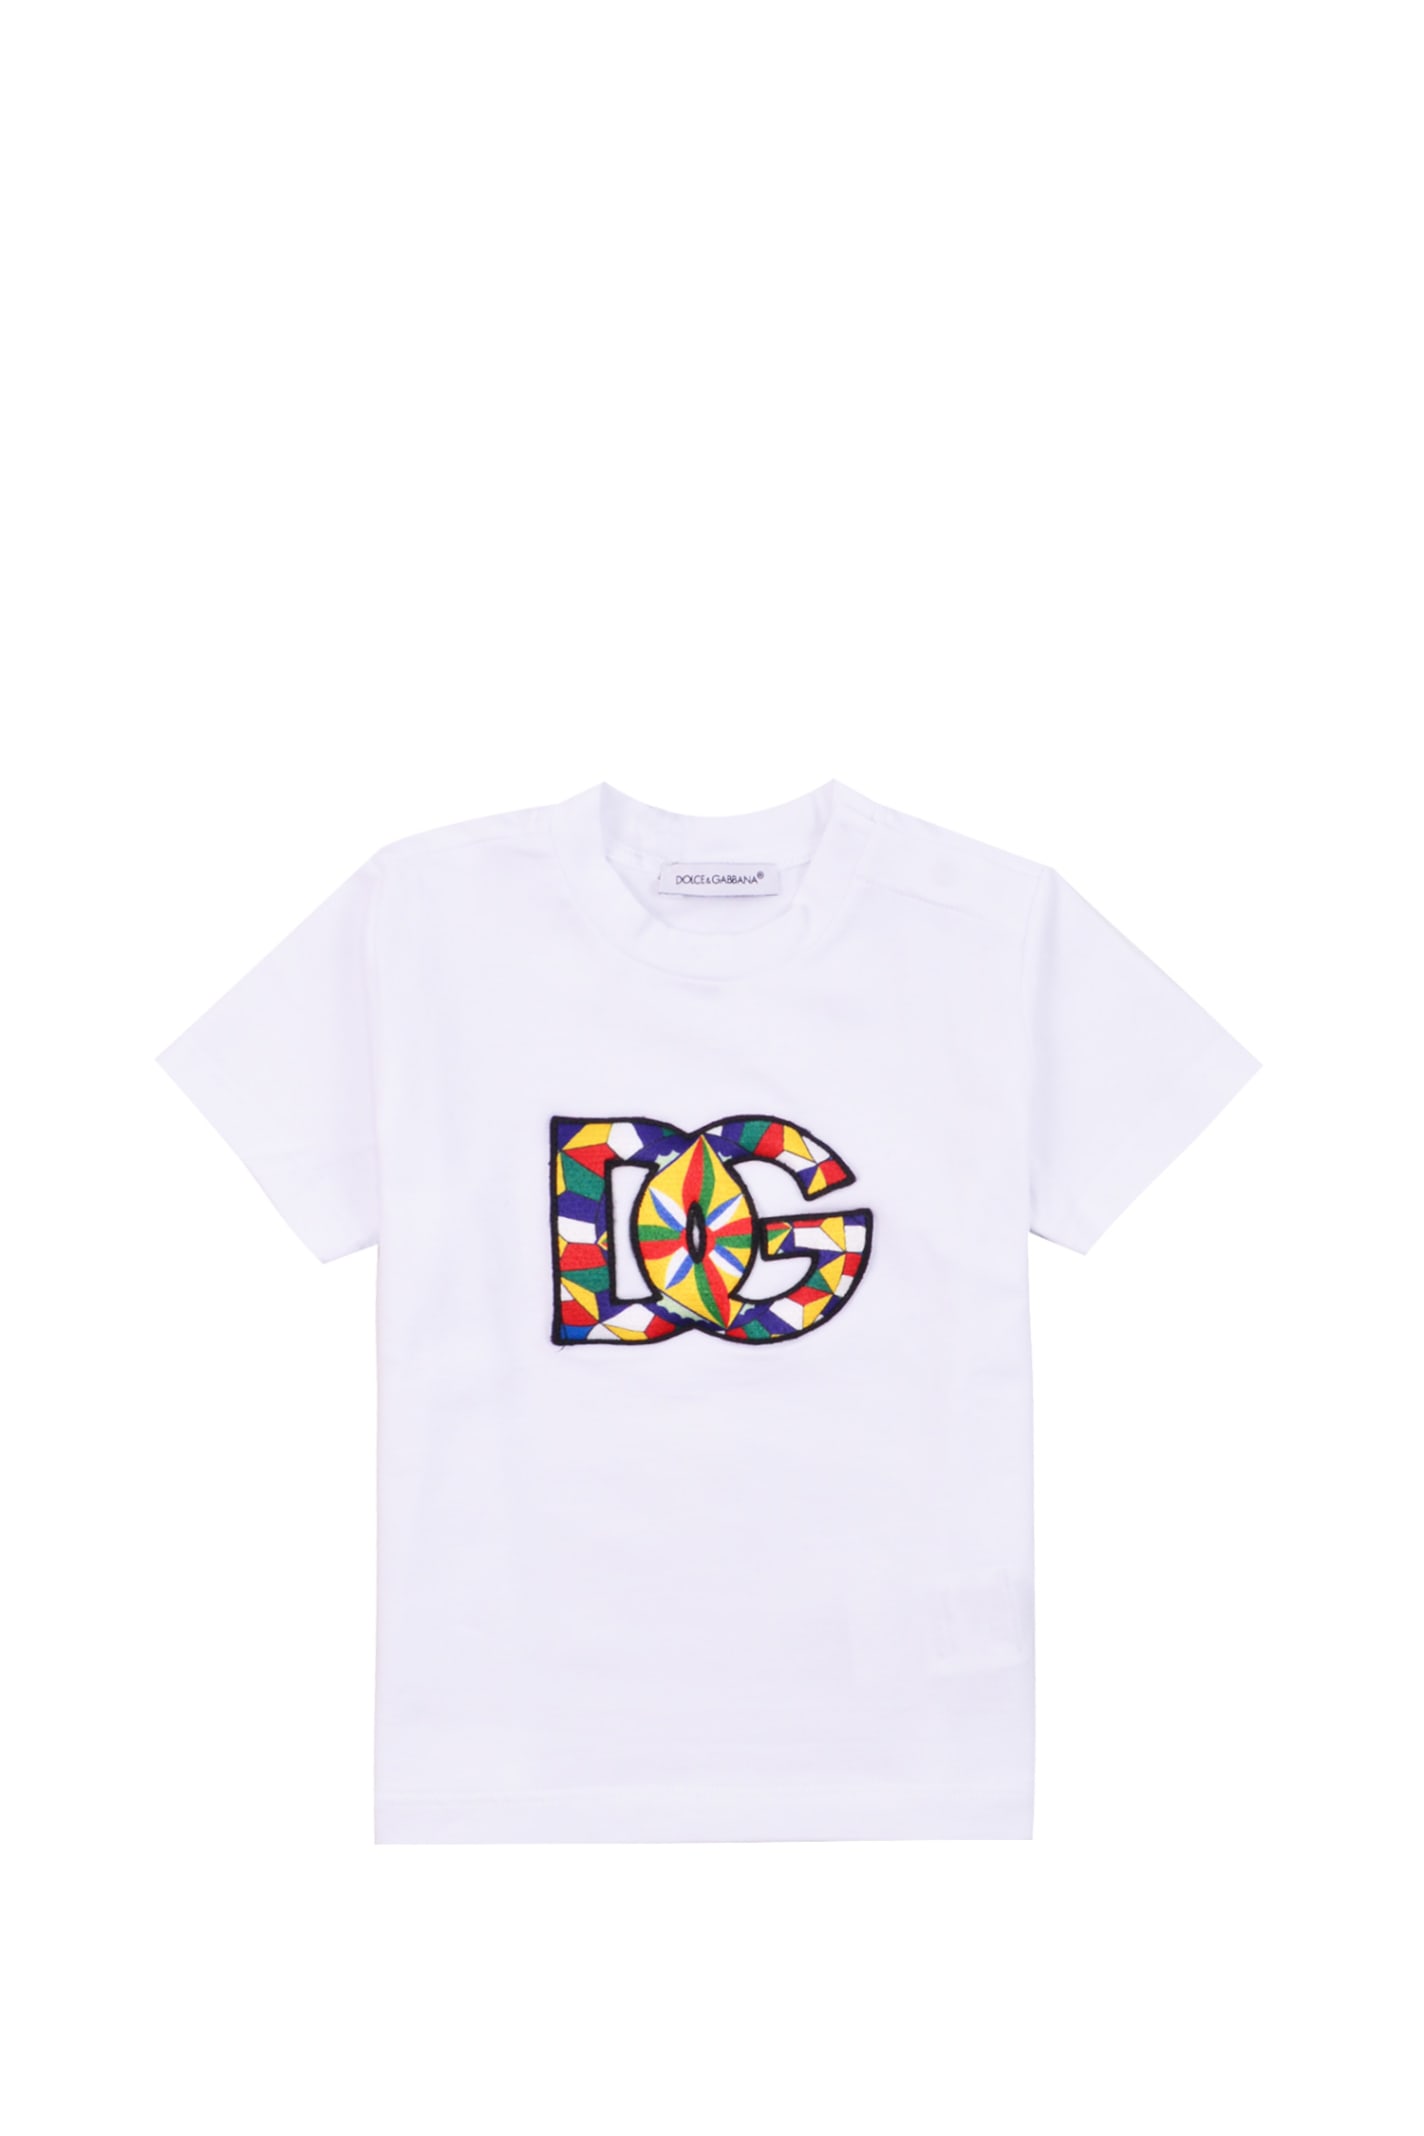 Dolce & Gabbana Babies' T-shirt With Print In White